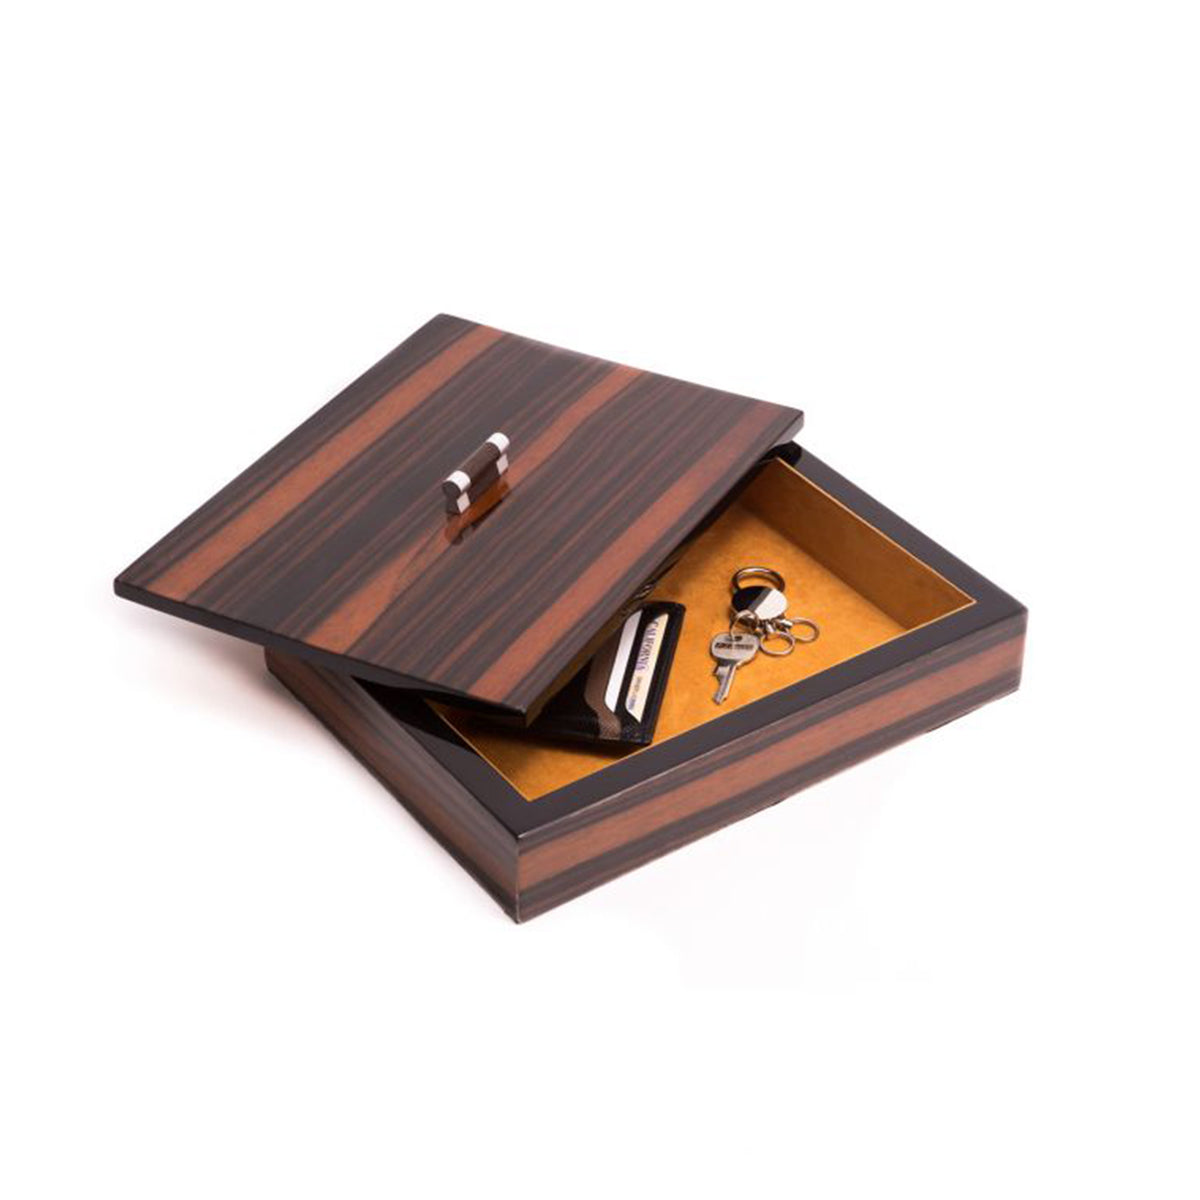 Lacquered Wood Box